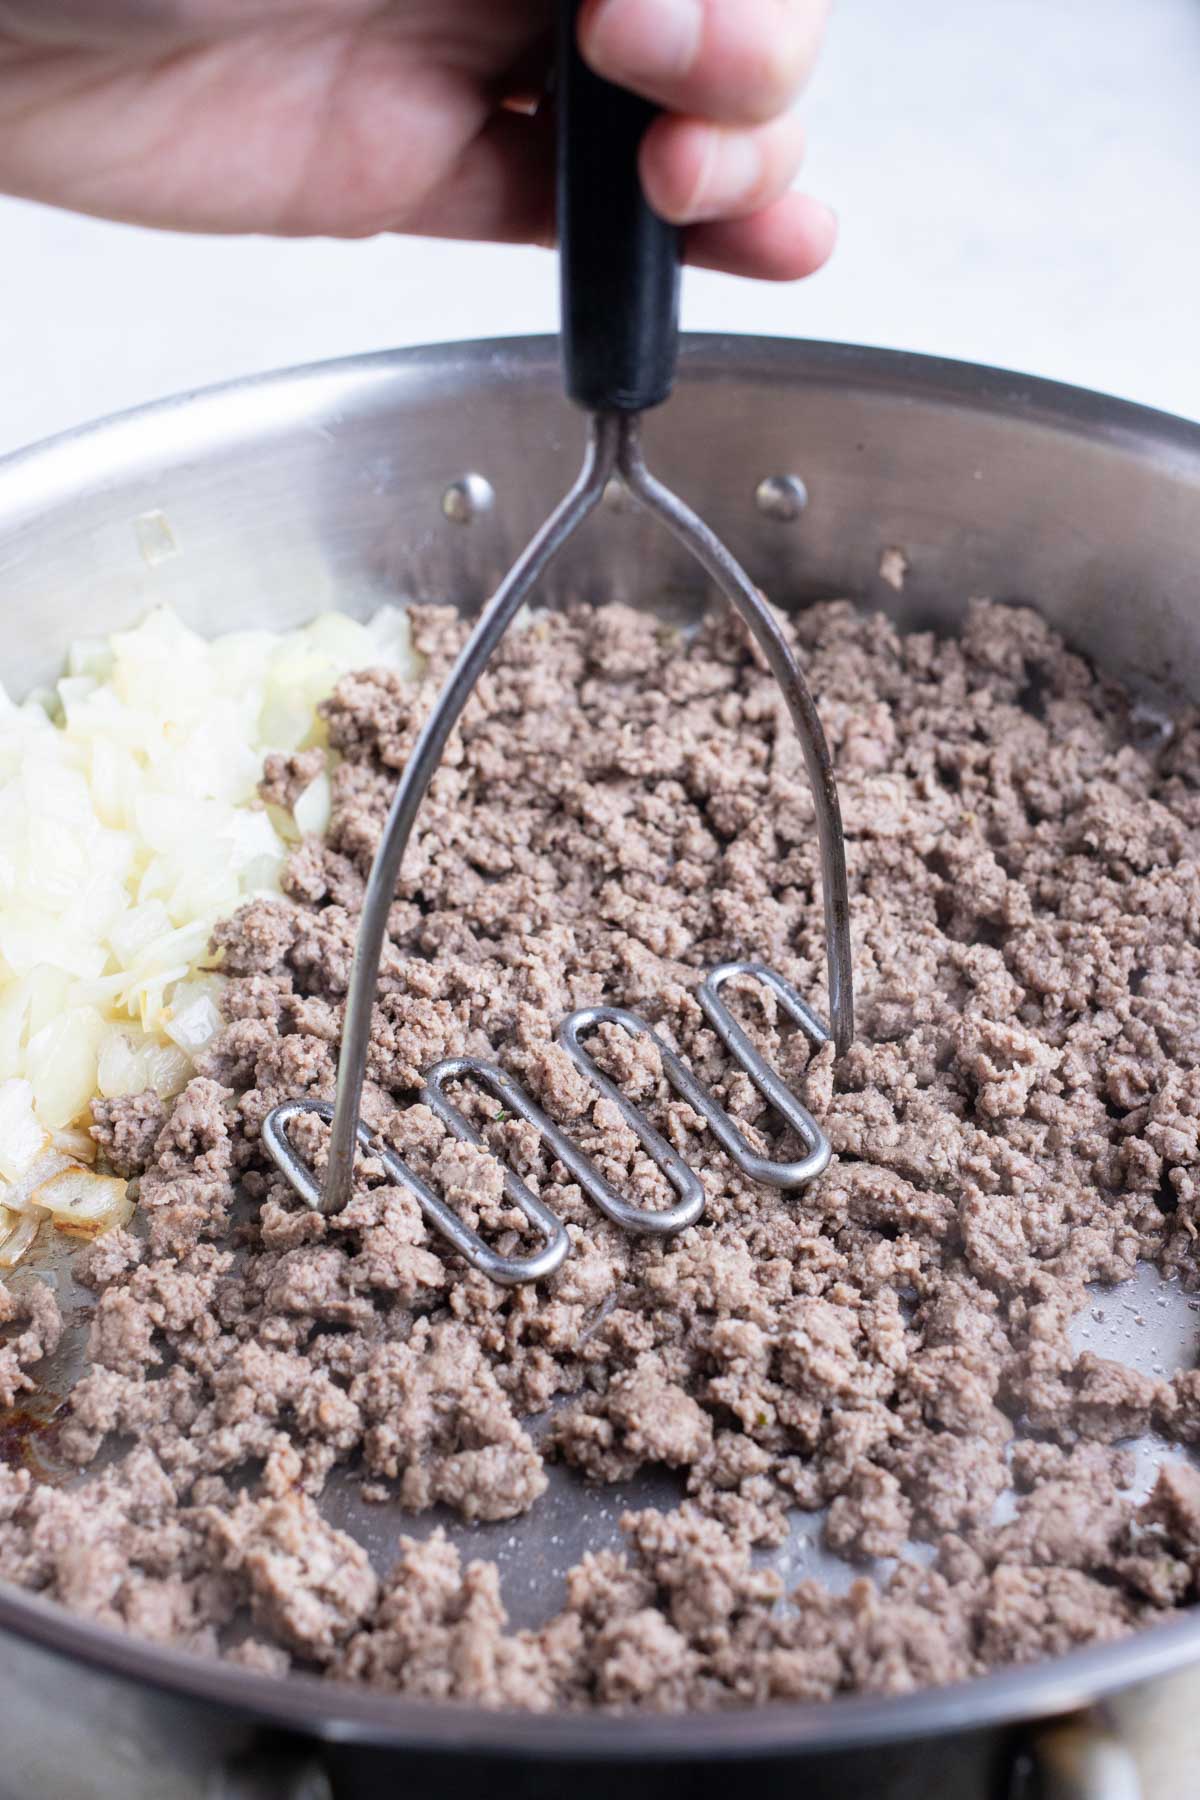 Ground beef is cooked in crumbles in the skillet.